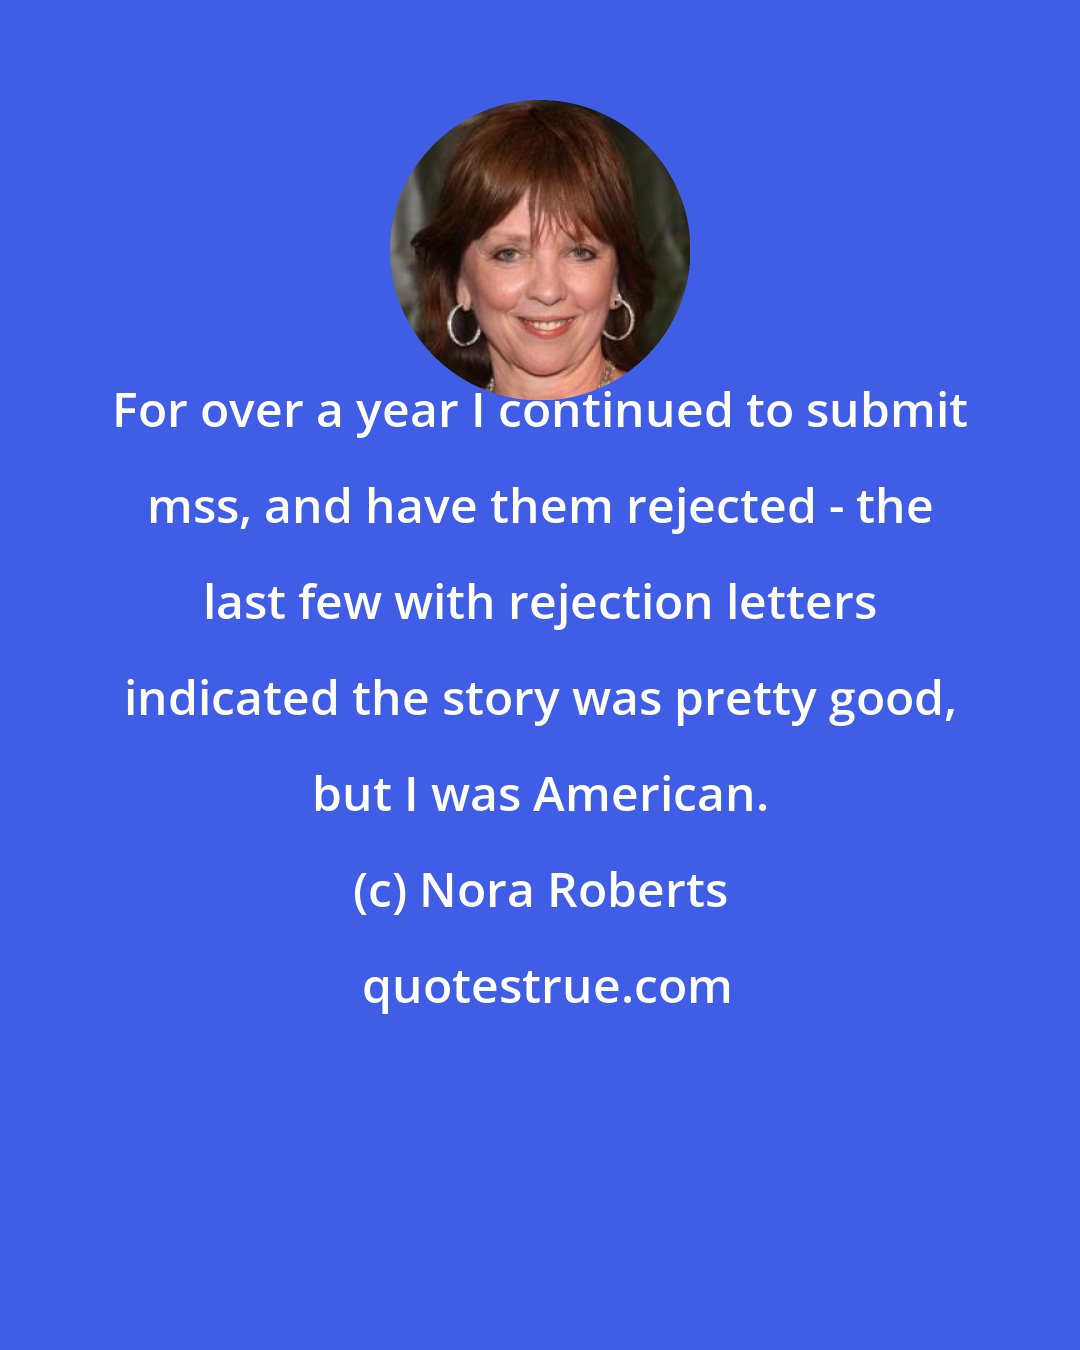 Nora Roberts: For over a year I continued to submit mss, and have them rejected - the last few with rejection letters indicated the story was pretty good, but I was American.